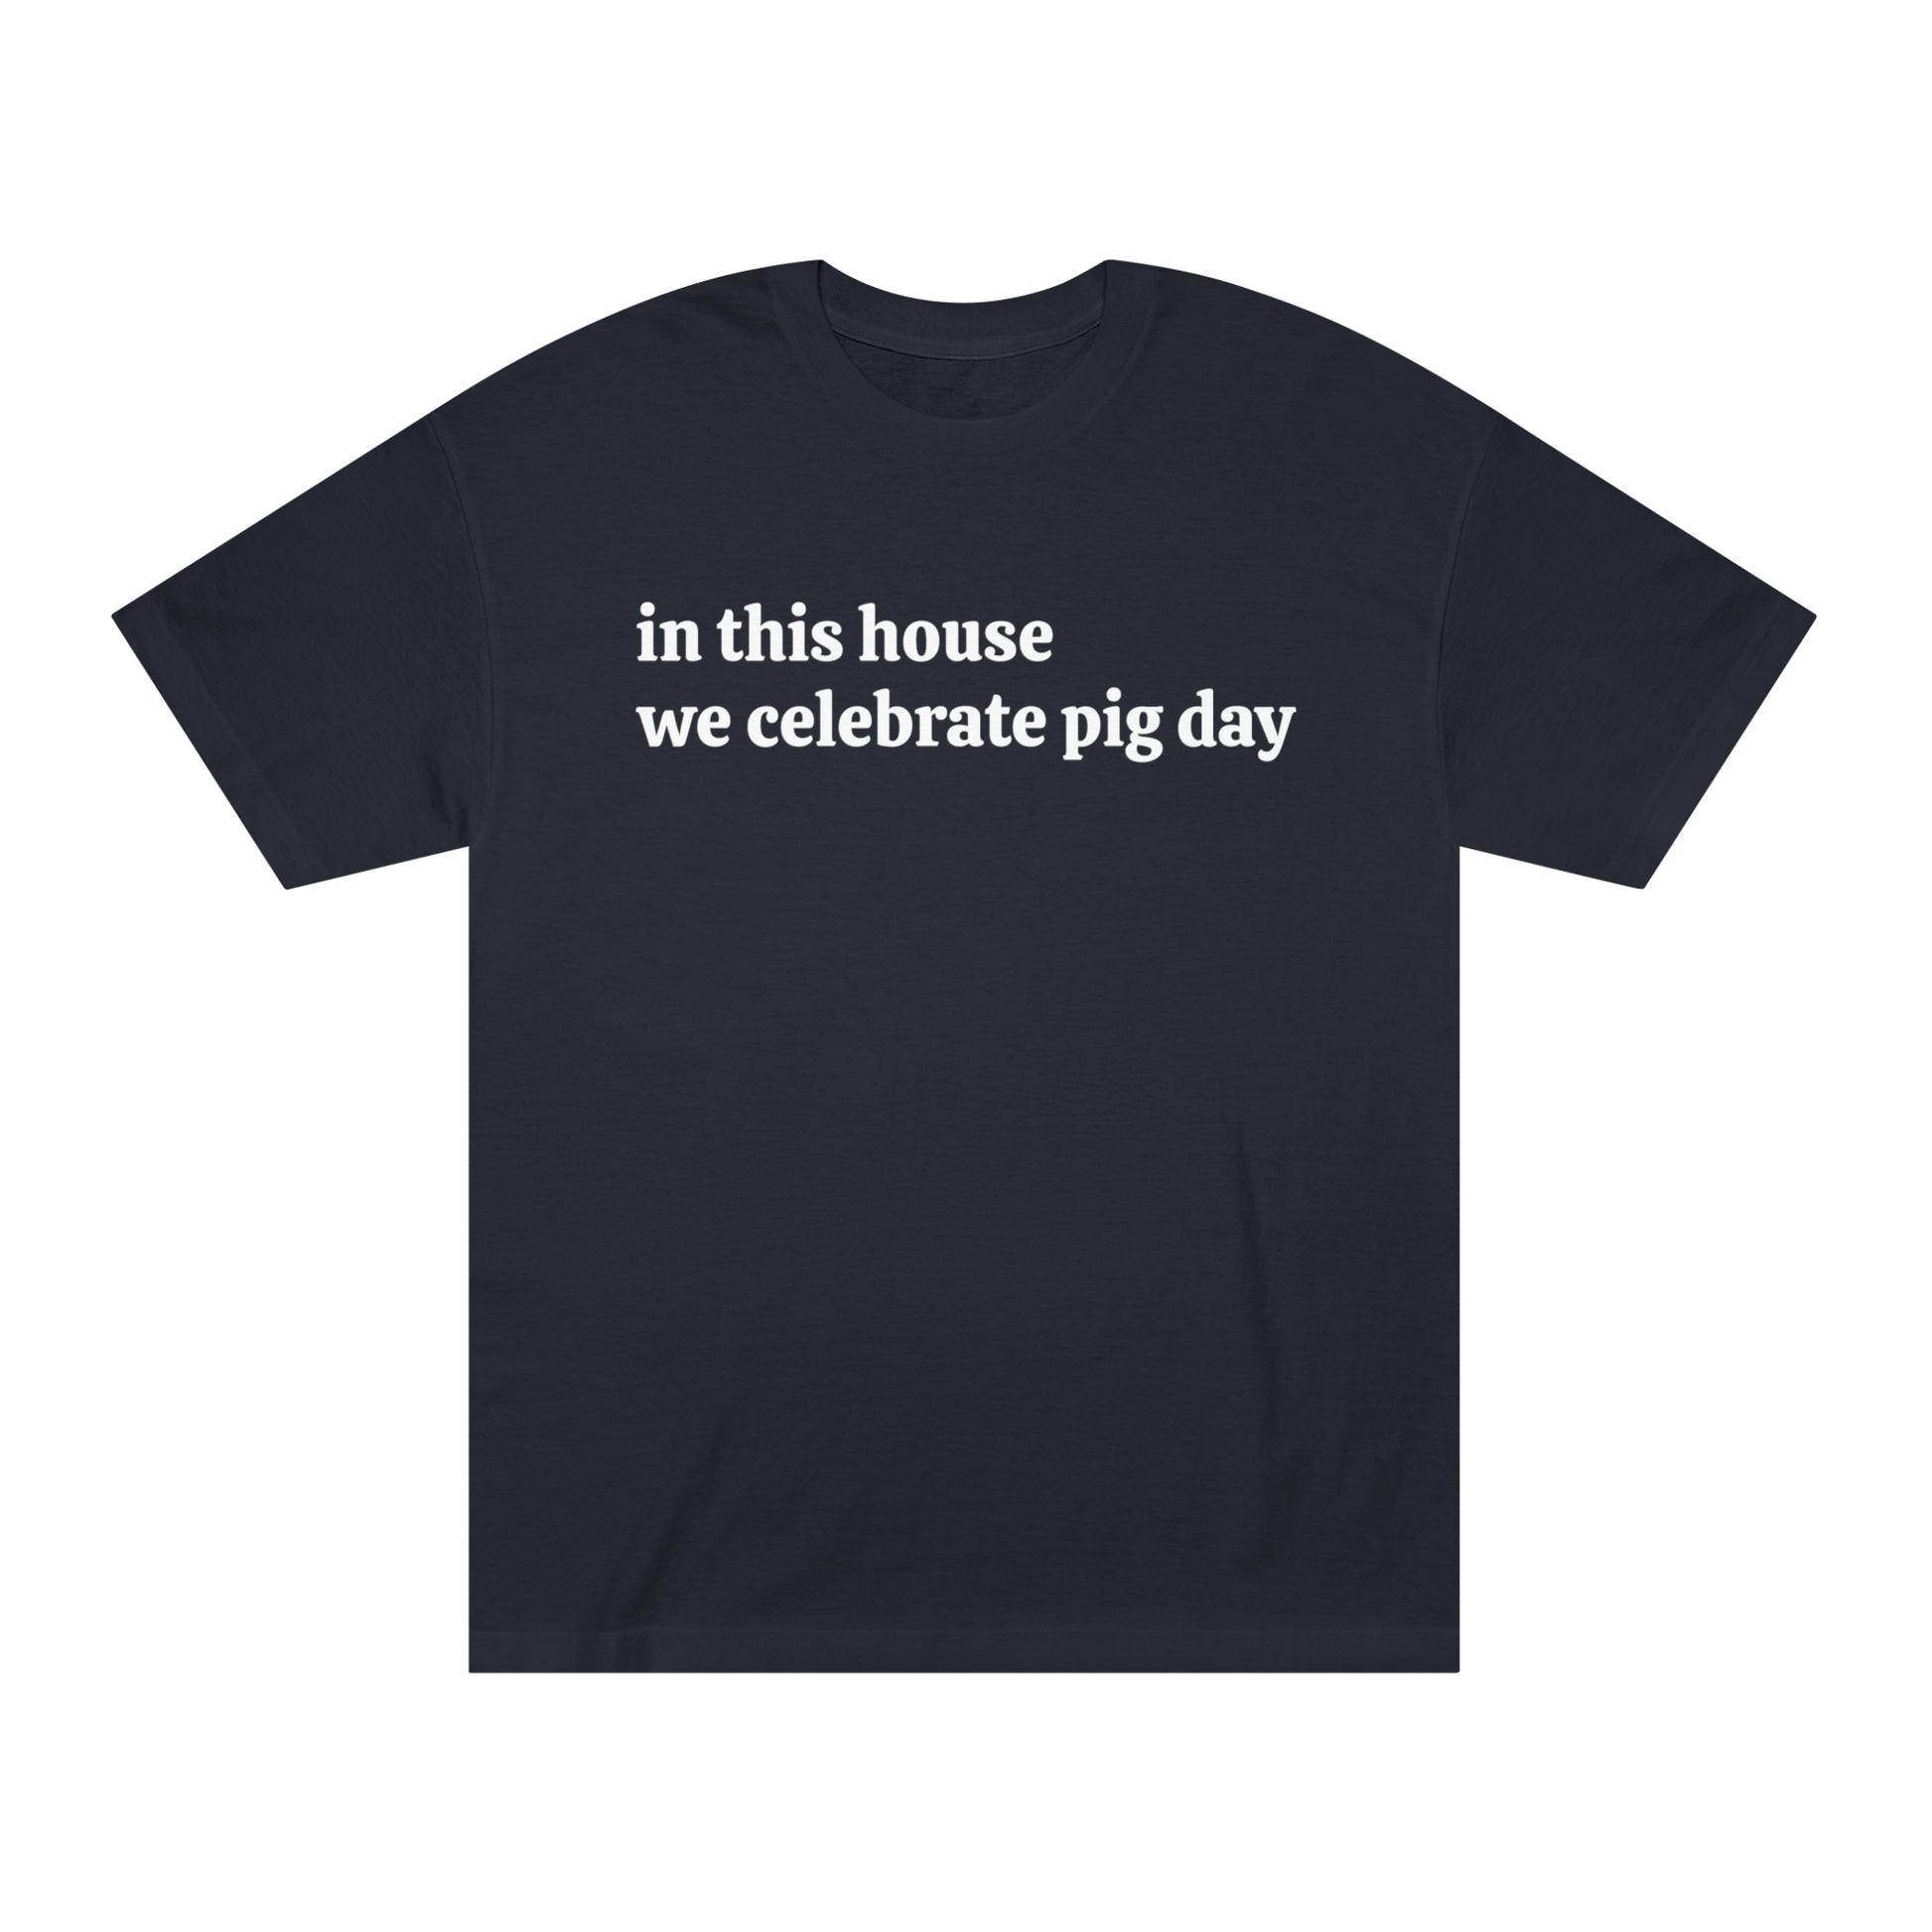 Image of a humorous T-shirt with the phrase "In this house we celebrate Pig Day."